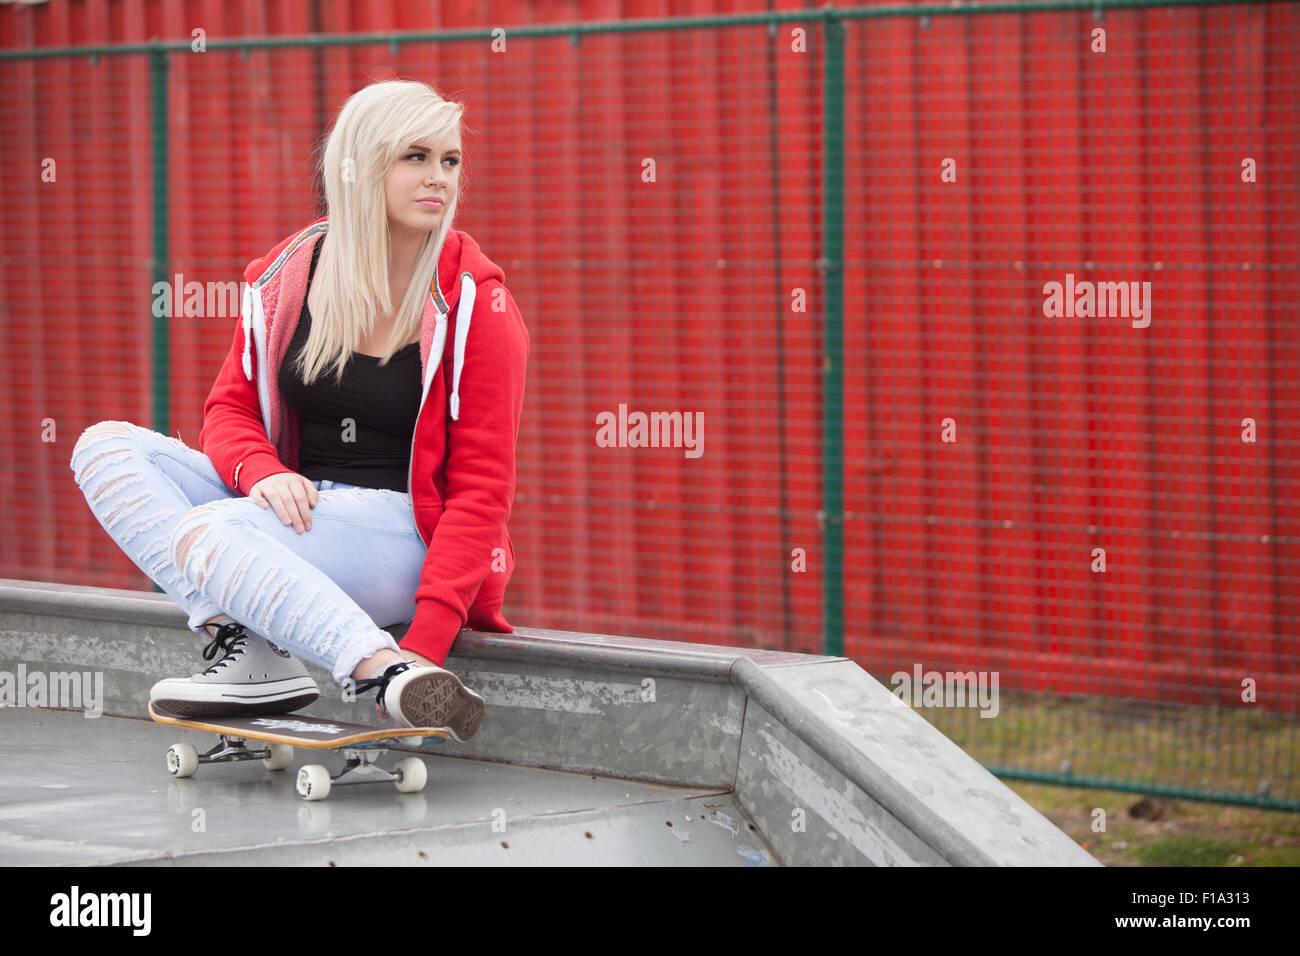 Pretty teenage girl sitting down outside with feet on skateboard at a skate park. Stock Photo